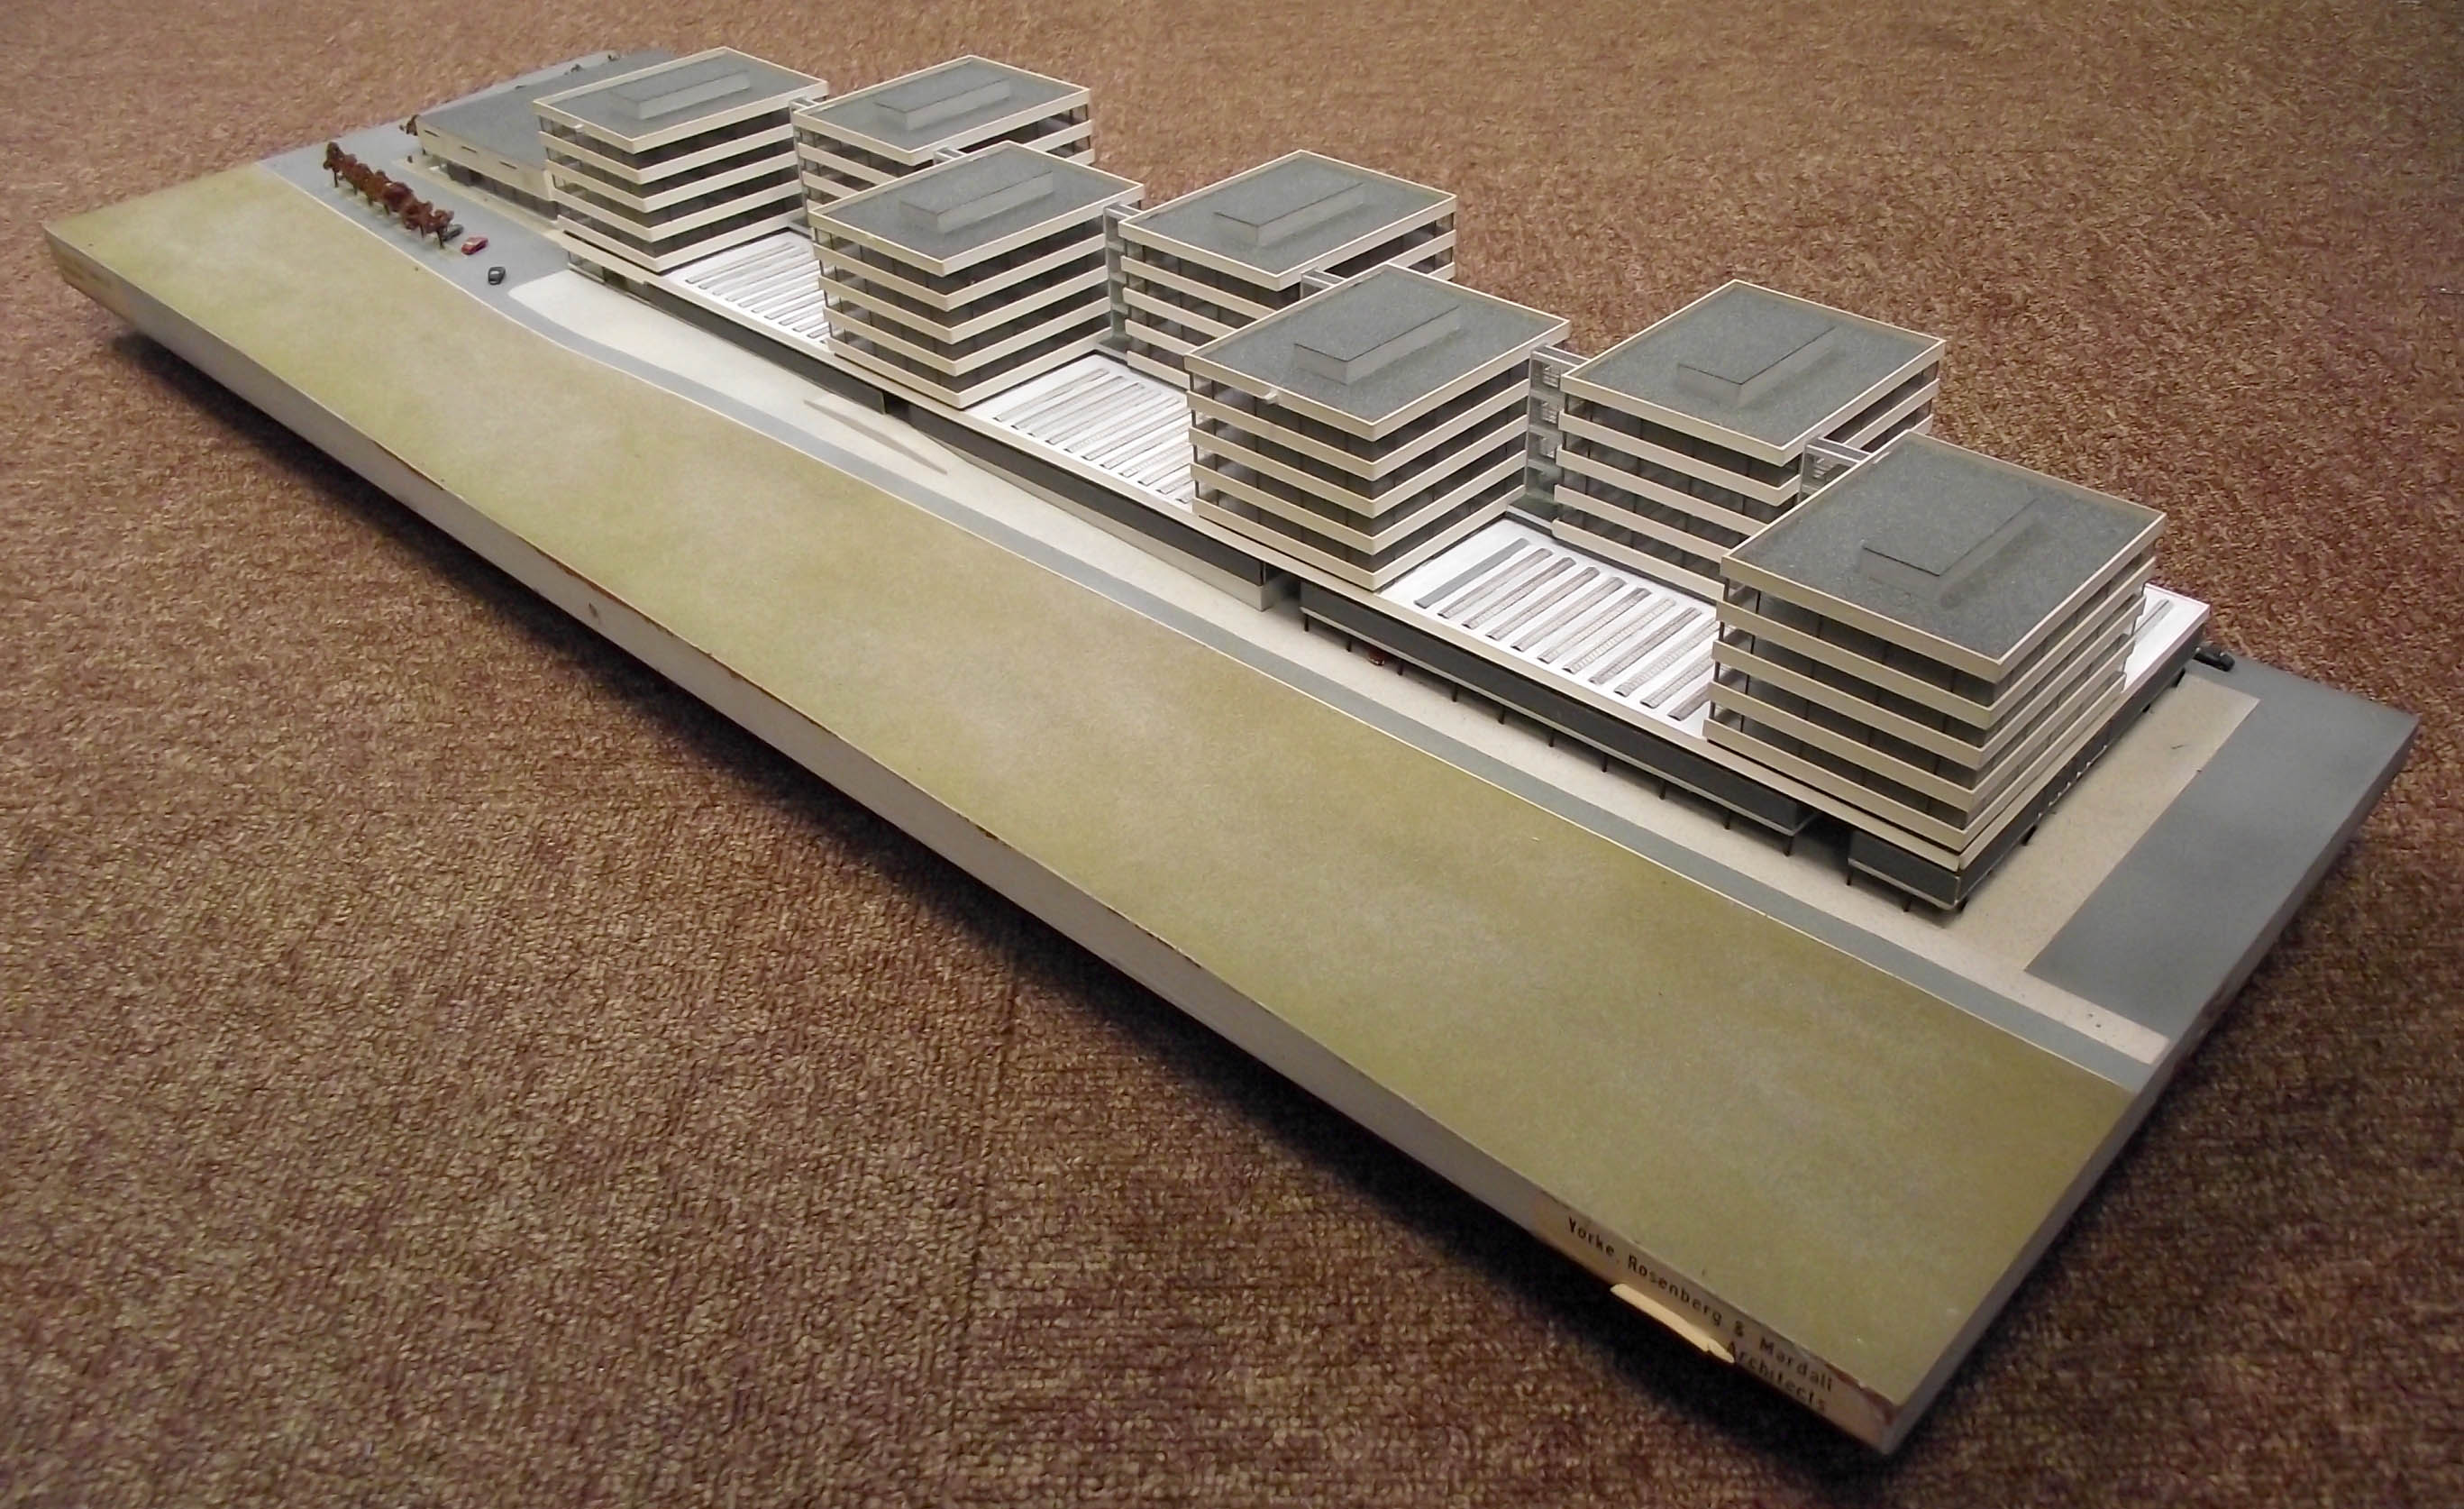 Model of the proposed seven tower facility at Rochester.